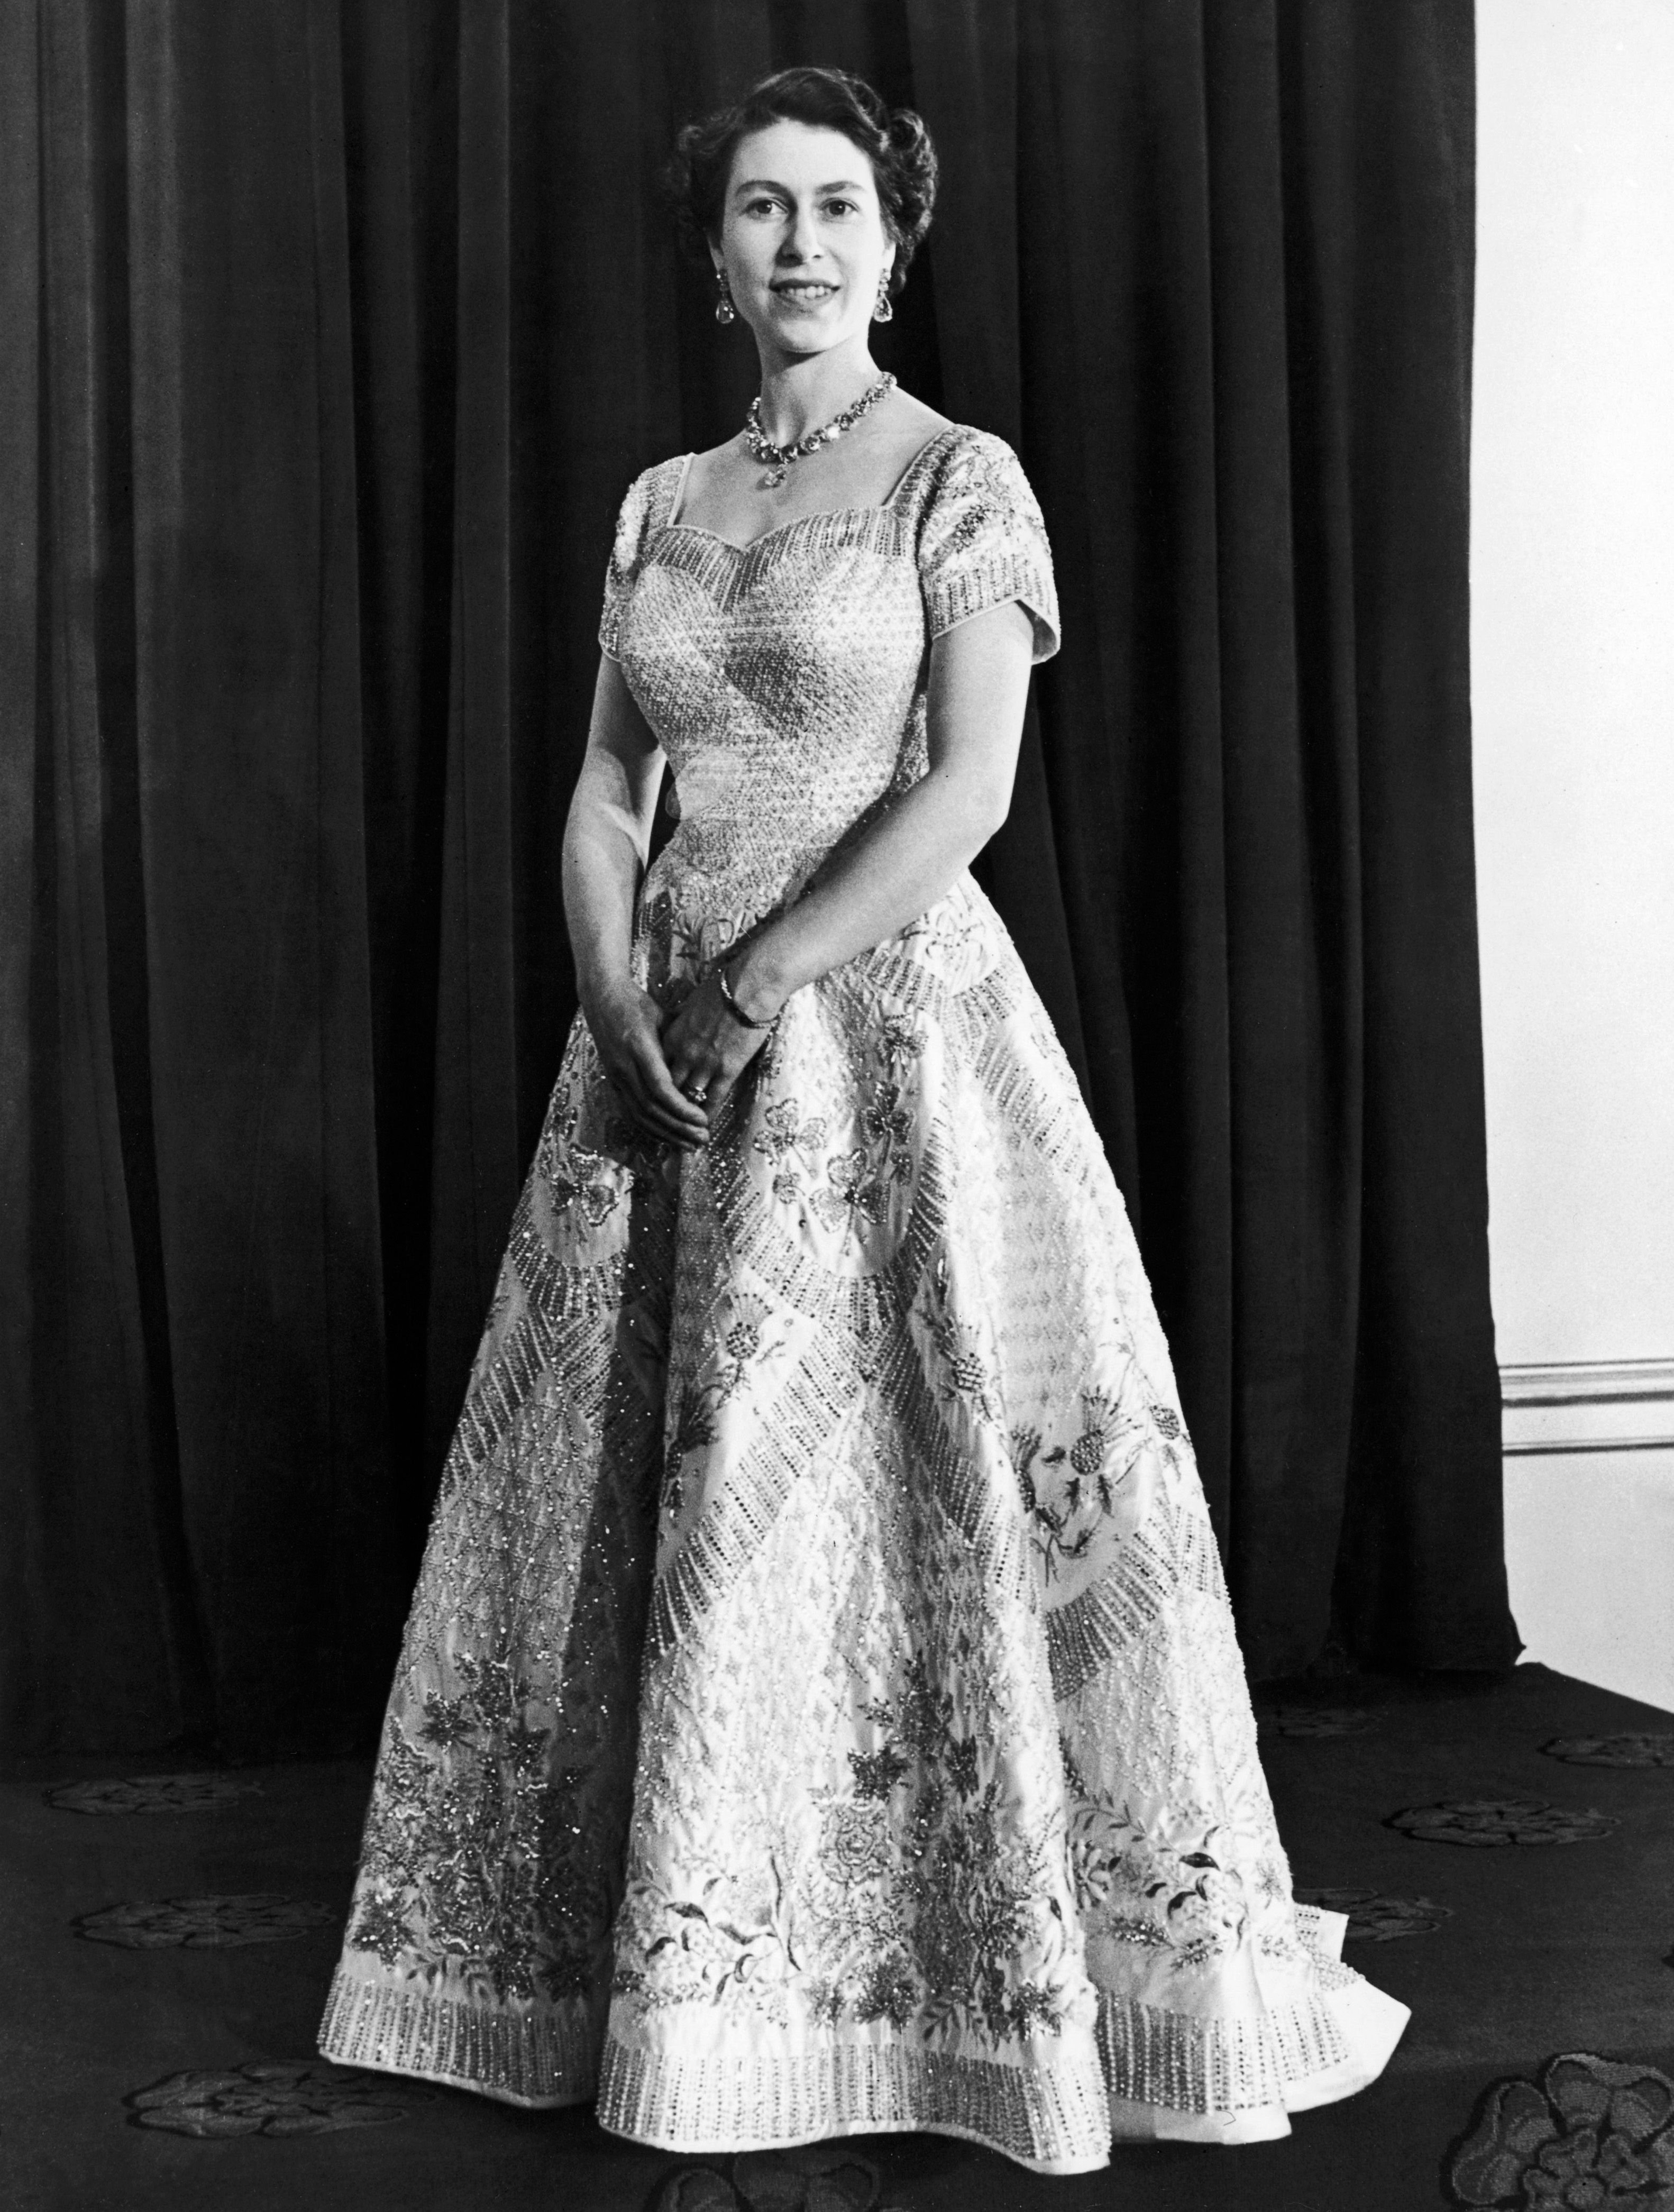 Queen Elizabeth's official portrait for the Coronation in 1953 | Photo: Mirrorpix/Getty Images